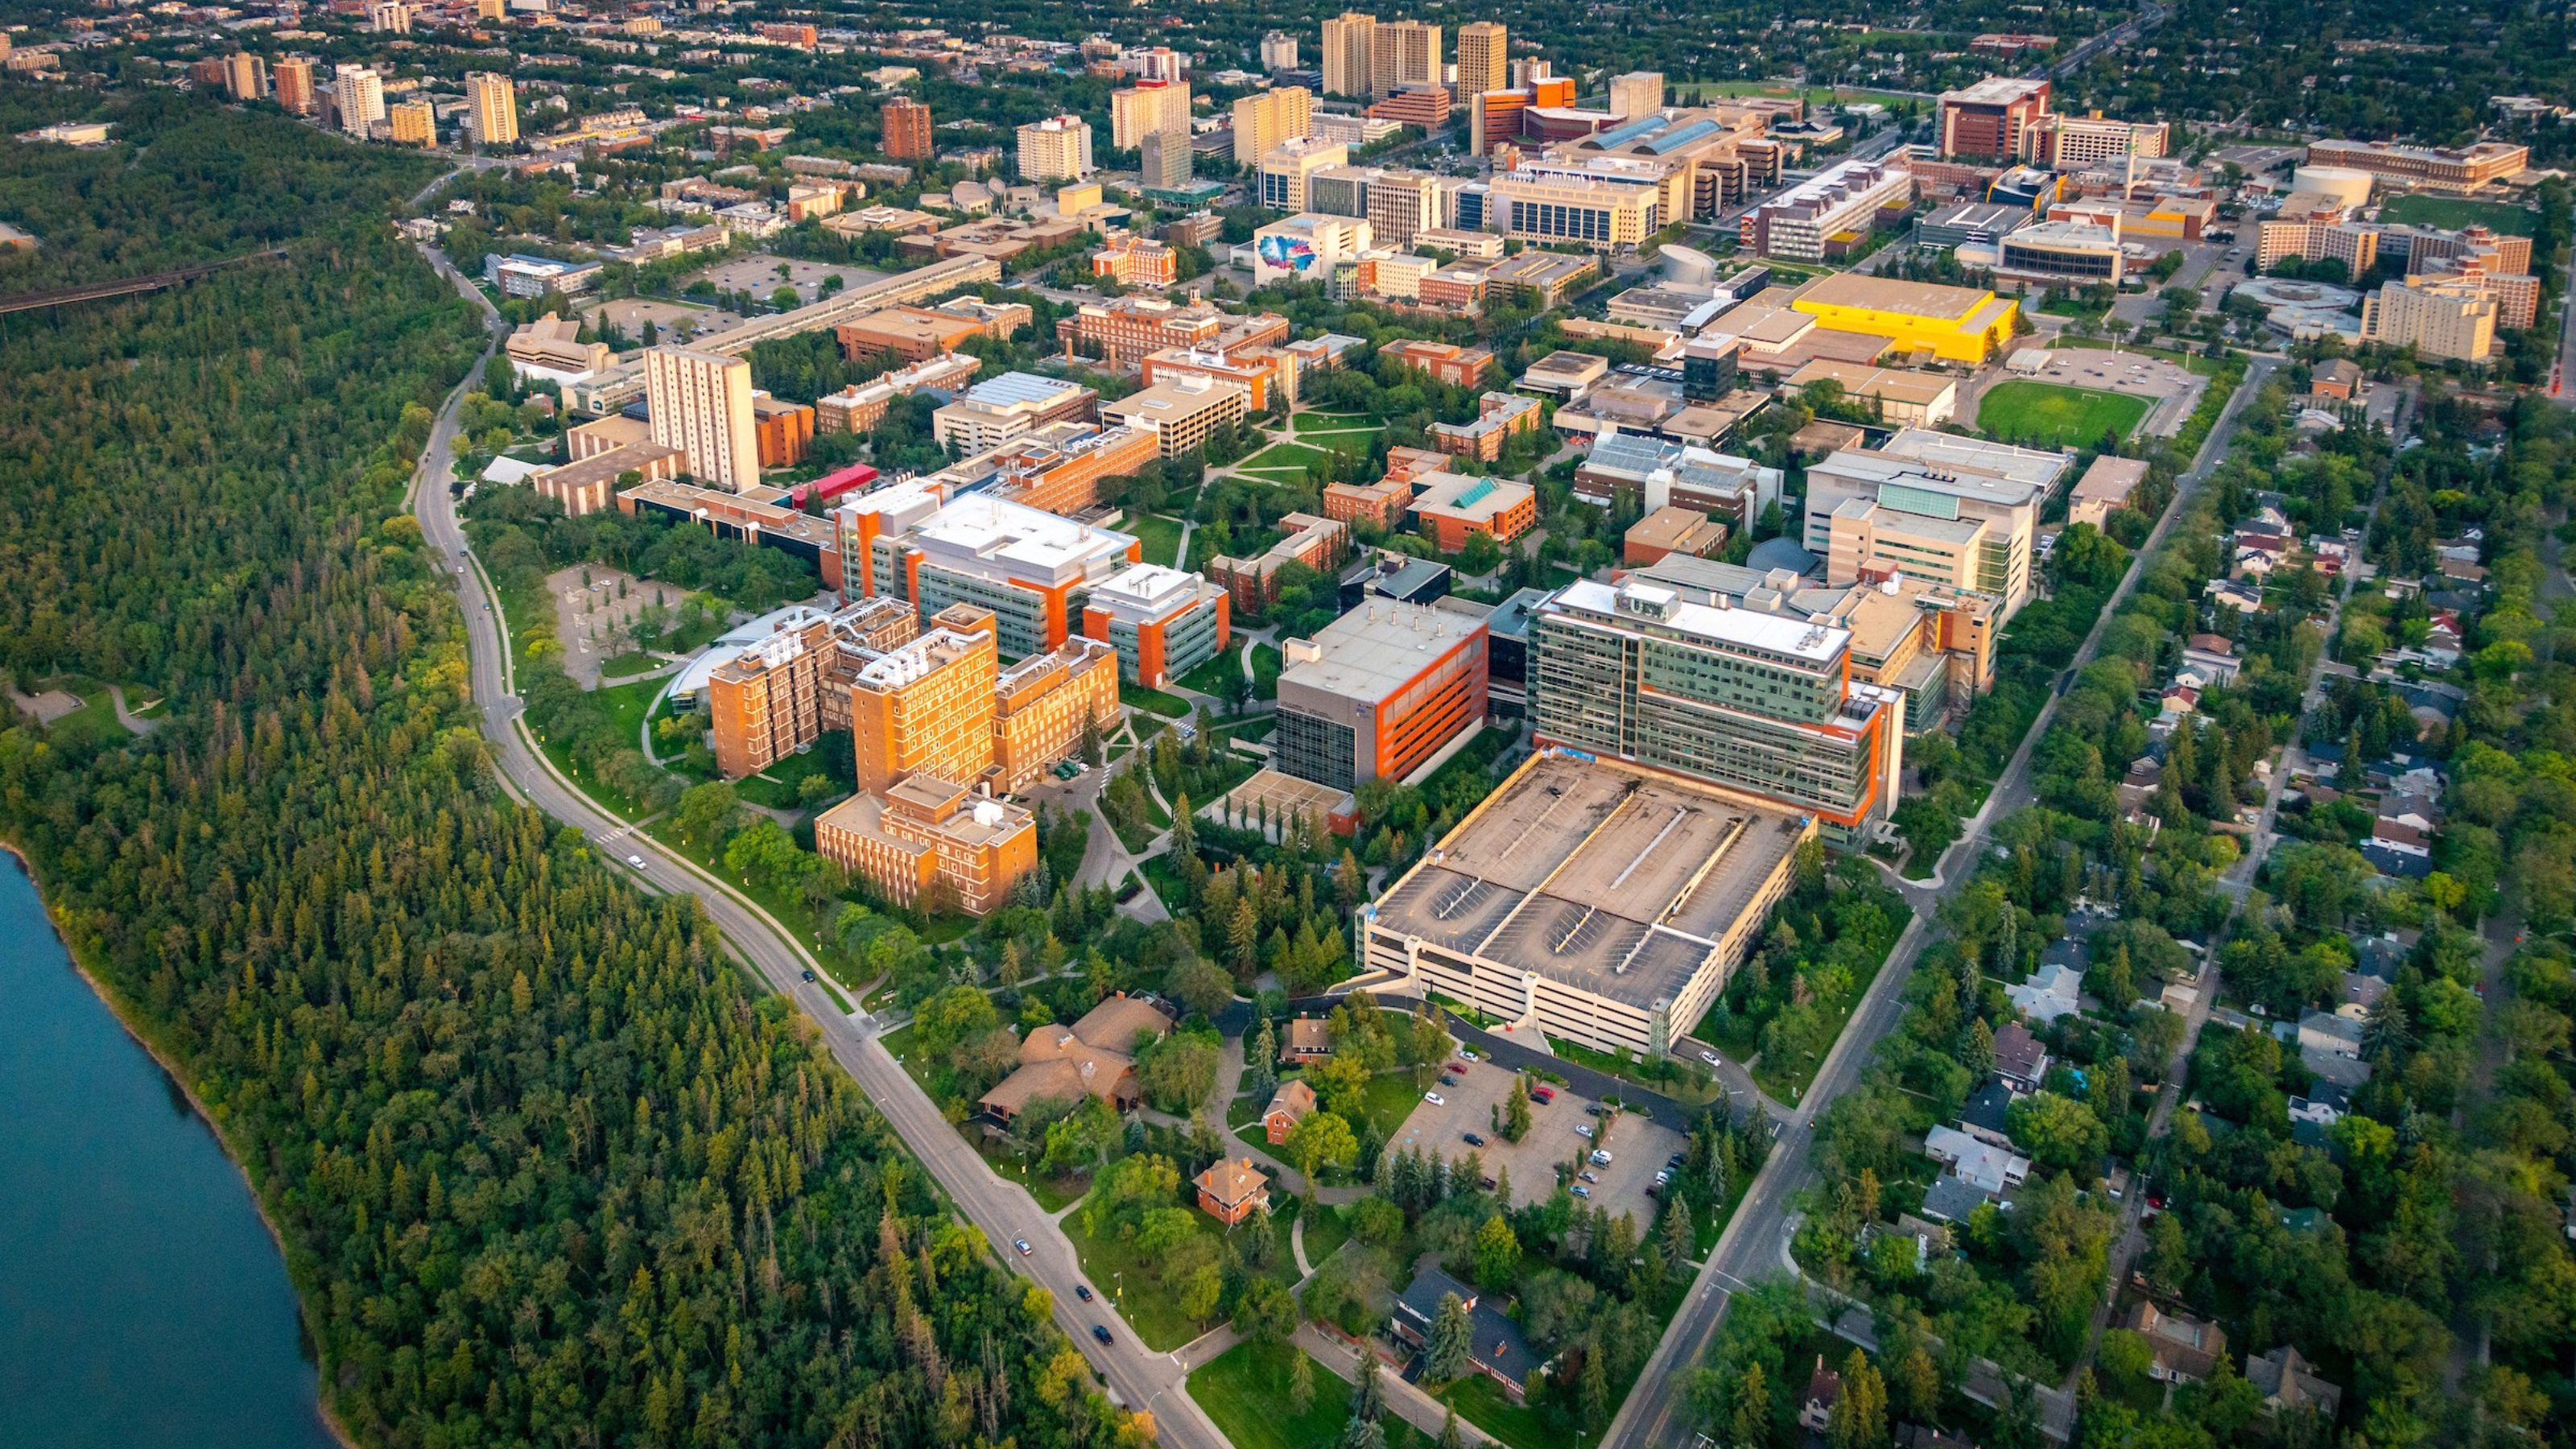 Aerial view of North Campus